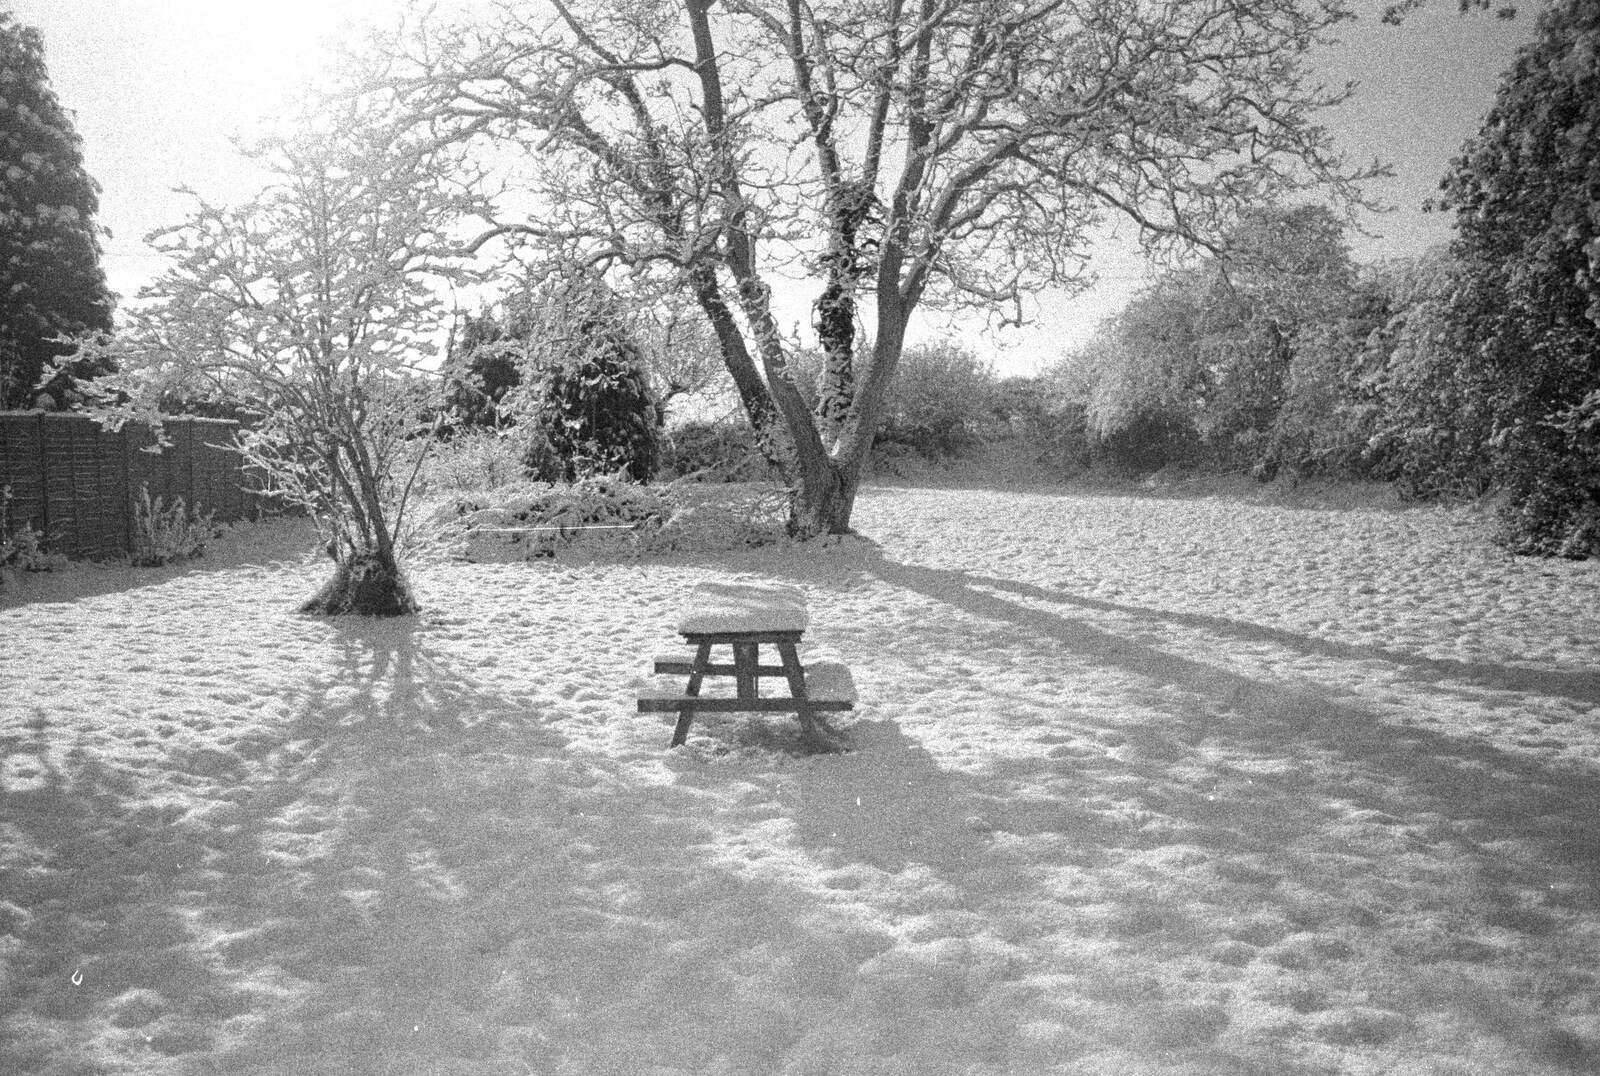 The old bench on the snowy lawn from 3G Lab, and Building a Staircase, Brome, Suffolk - 11th February 2001